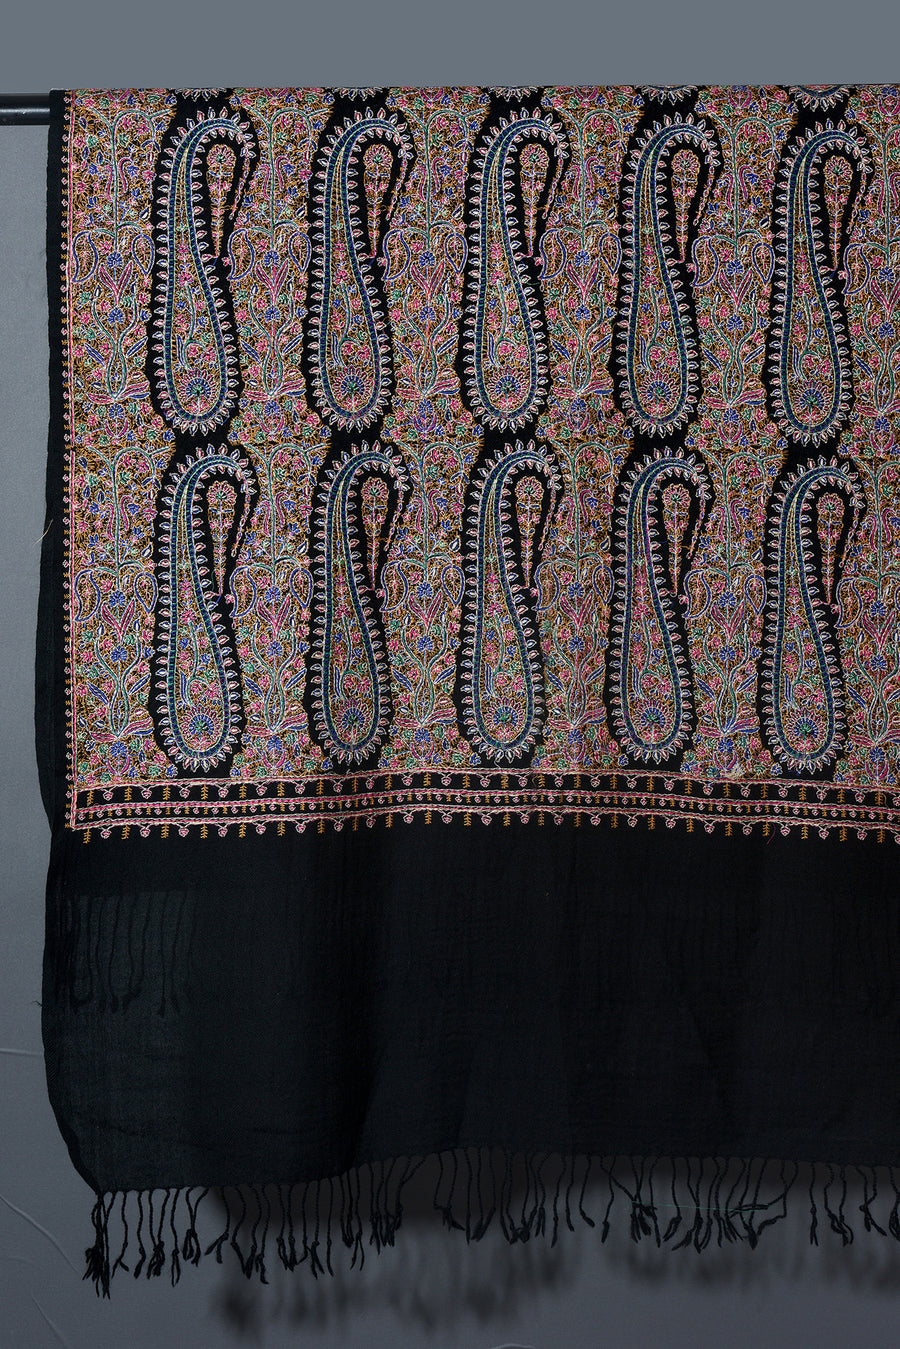 THE PAISLEY BUTA Exquisite Machine Embroidered Stole - Black Beauty with Blue Paisley